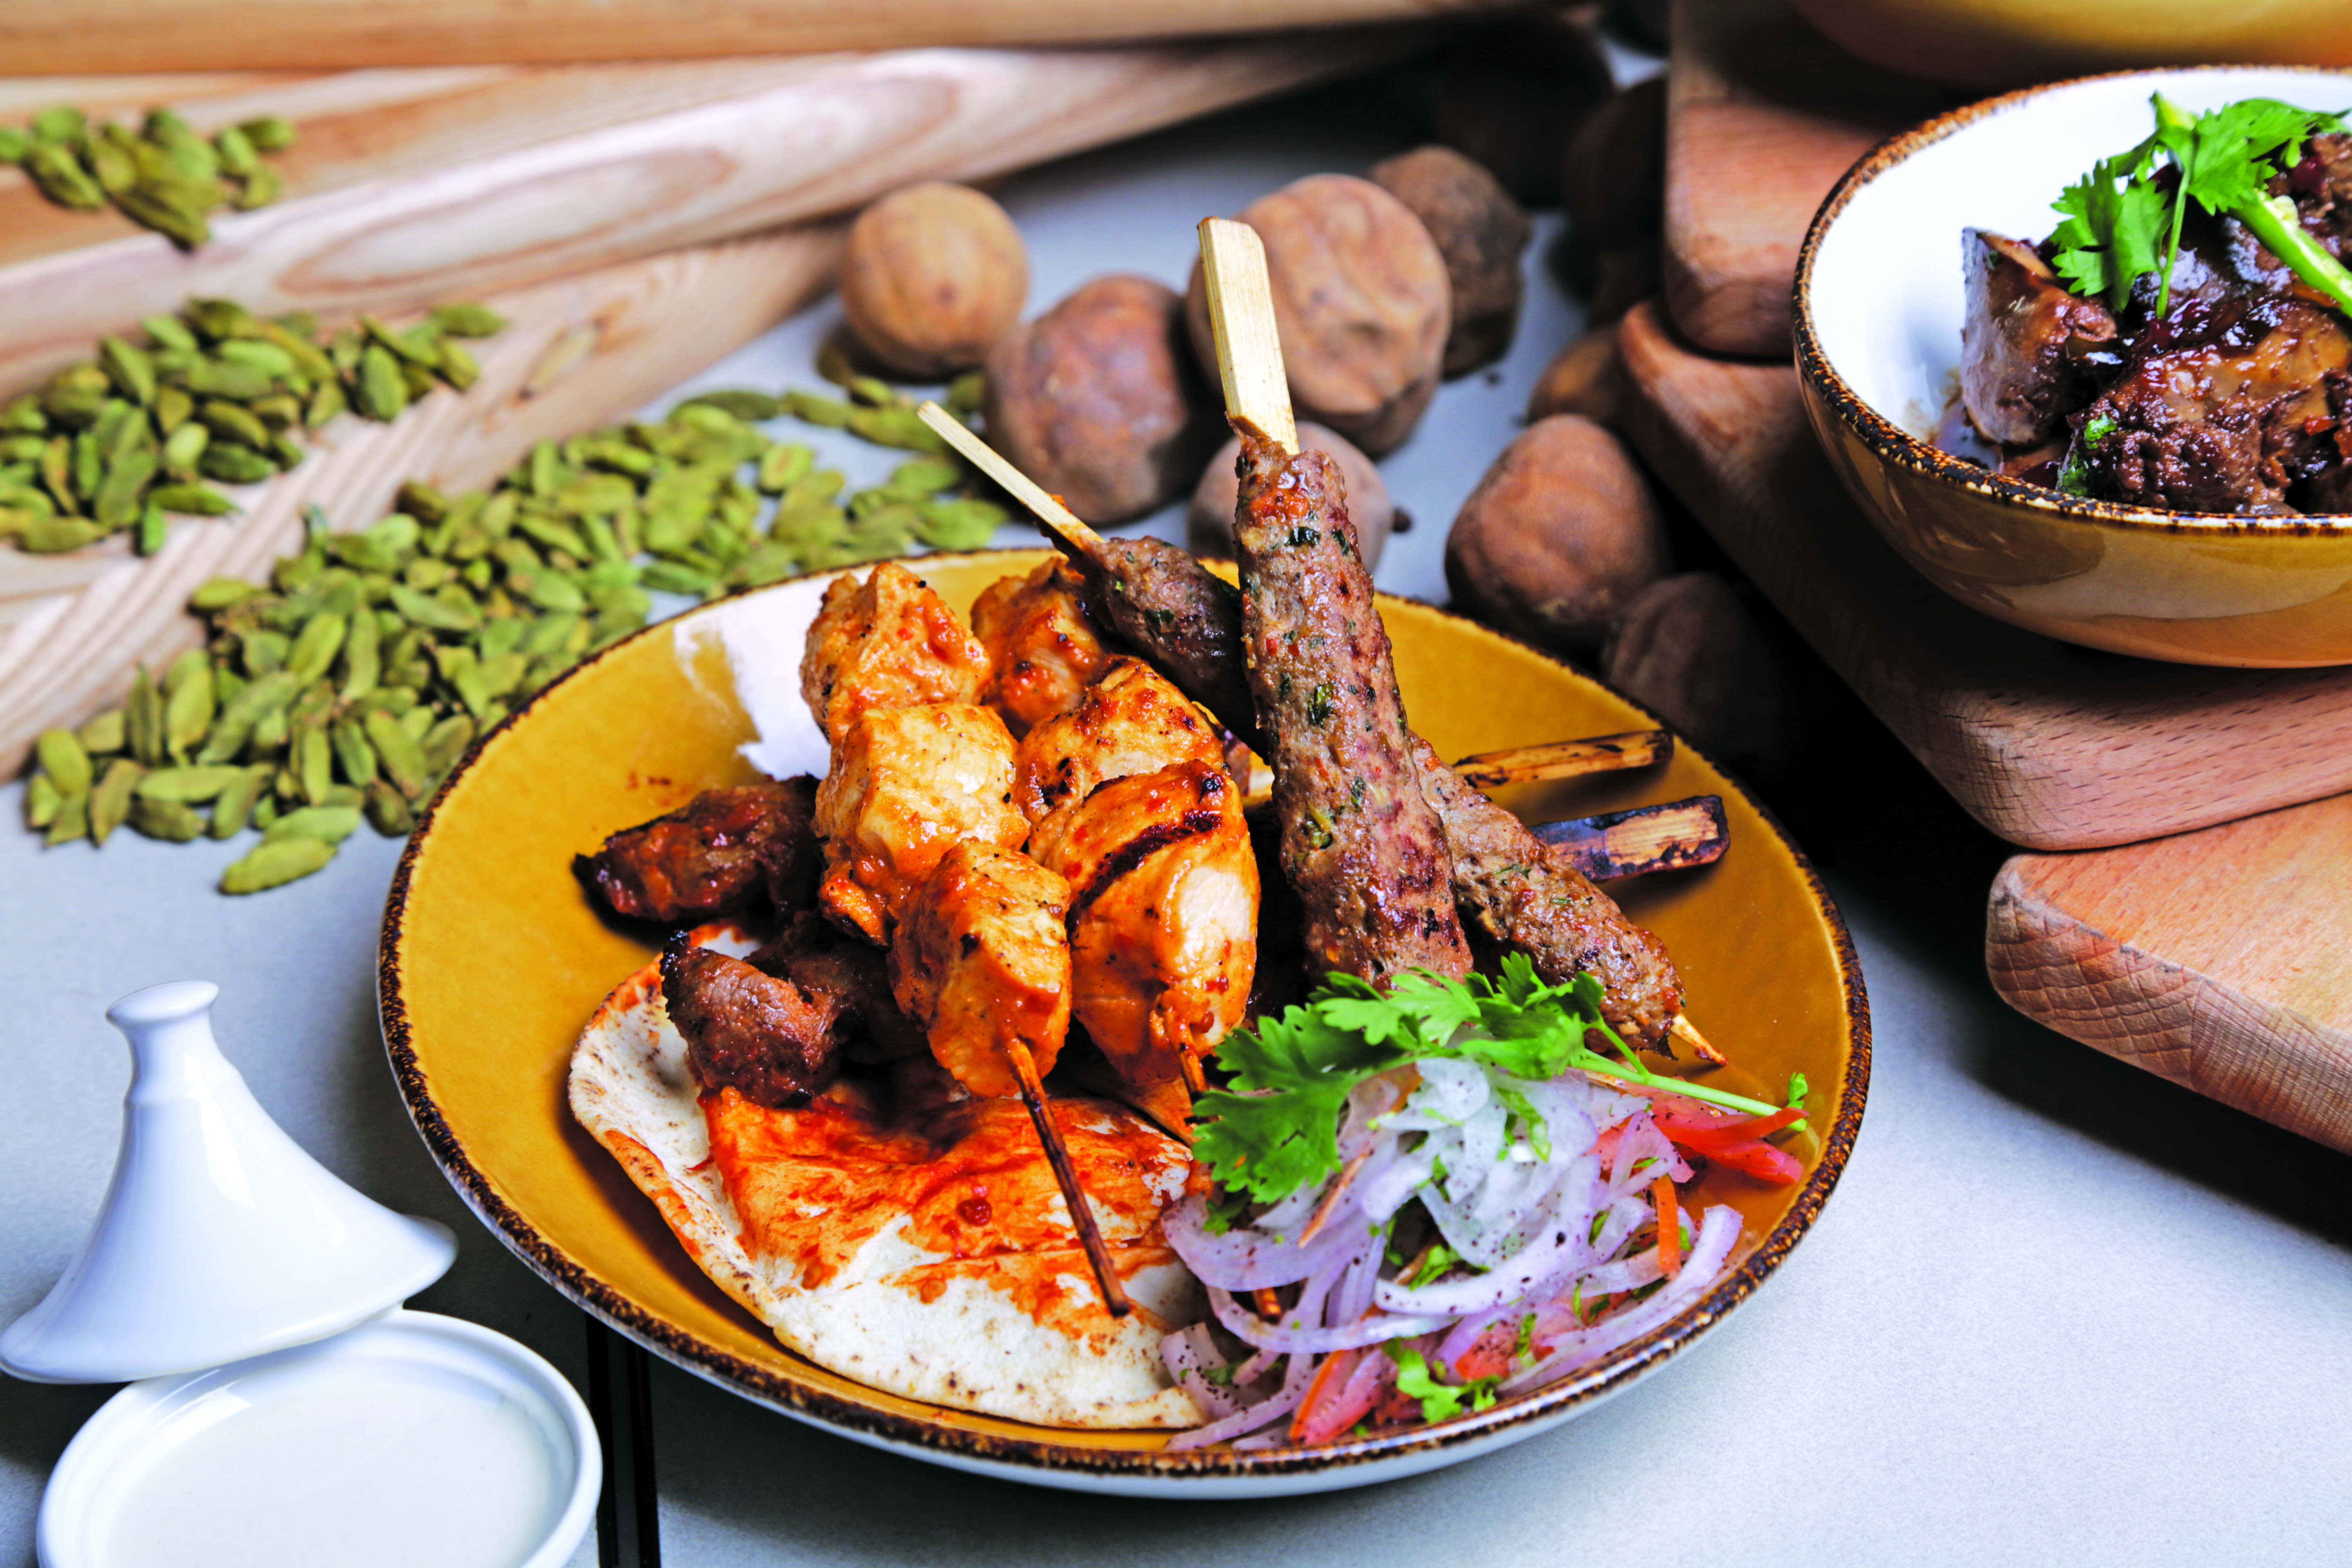 Oman dining: Iftar buffet at the Sheraton Hotel in Muscat